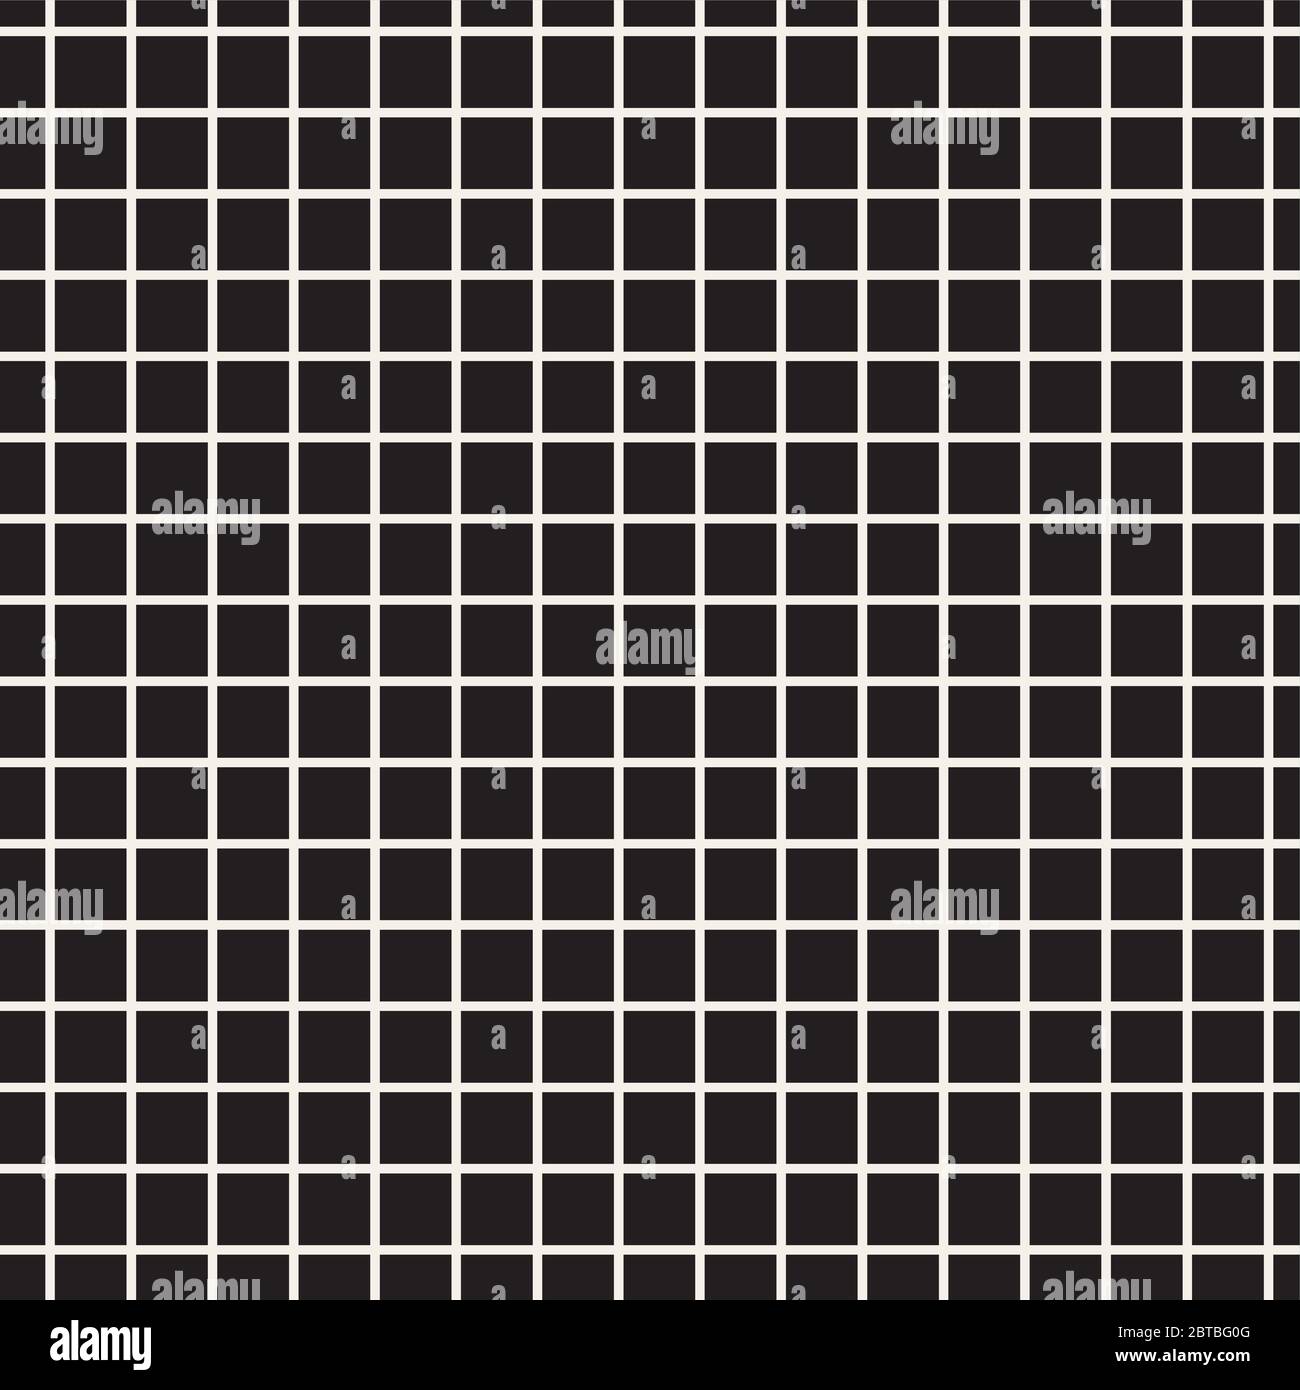 Transparent background grid colorless Royalty Free Vector